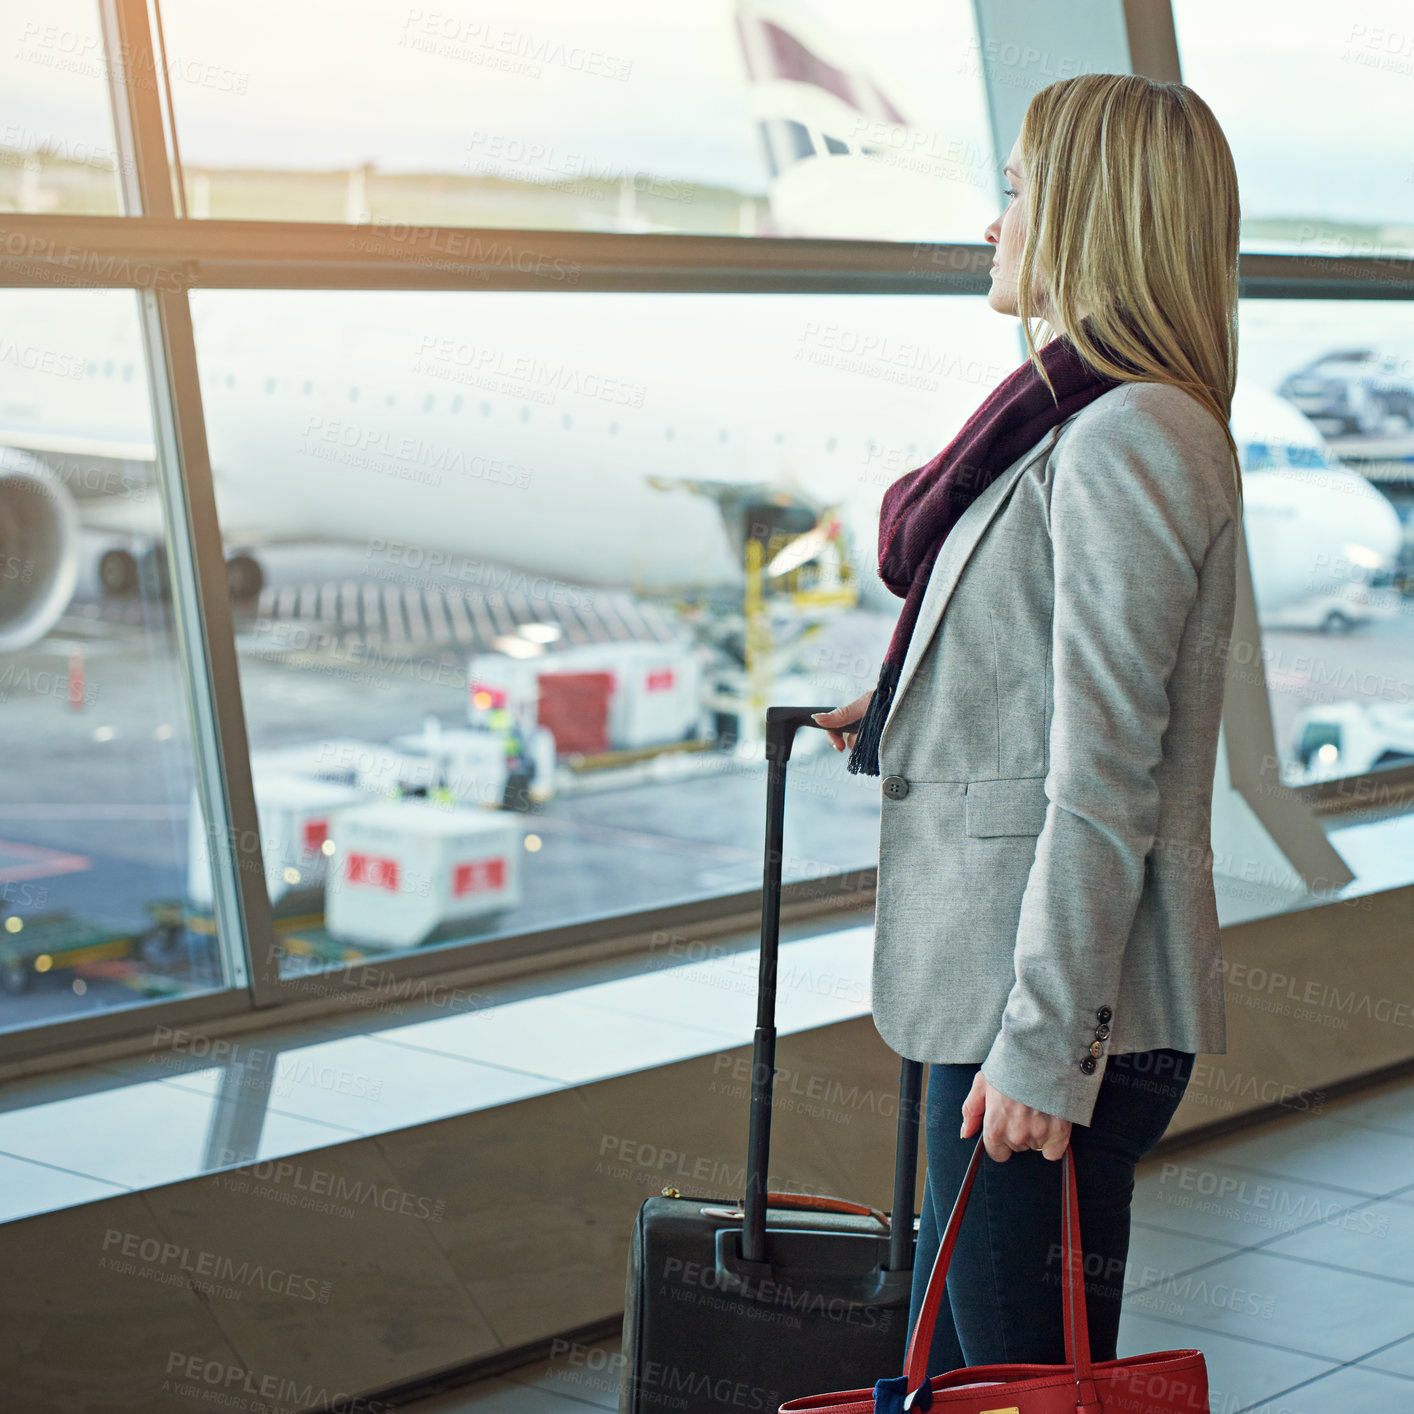 Buy stock photo Shot of a young woman standing in an airport looking out the window